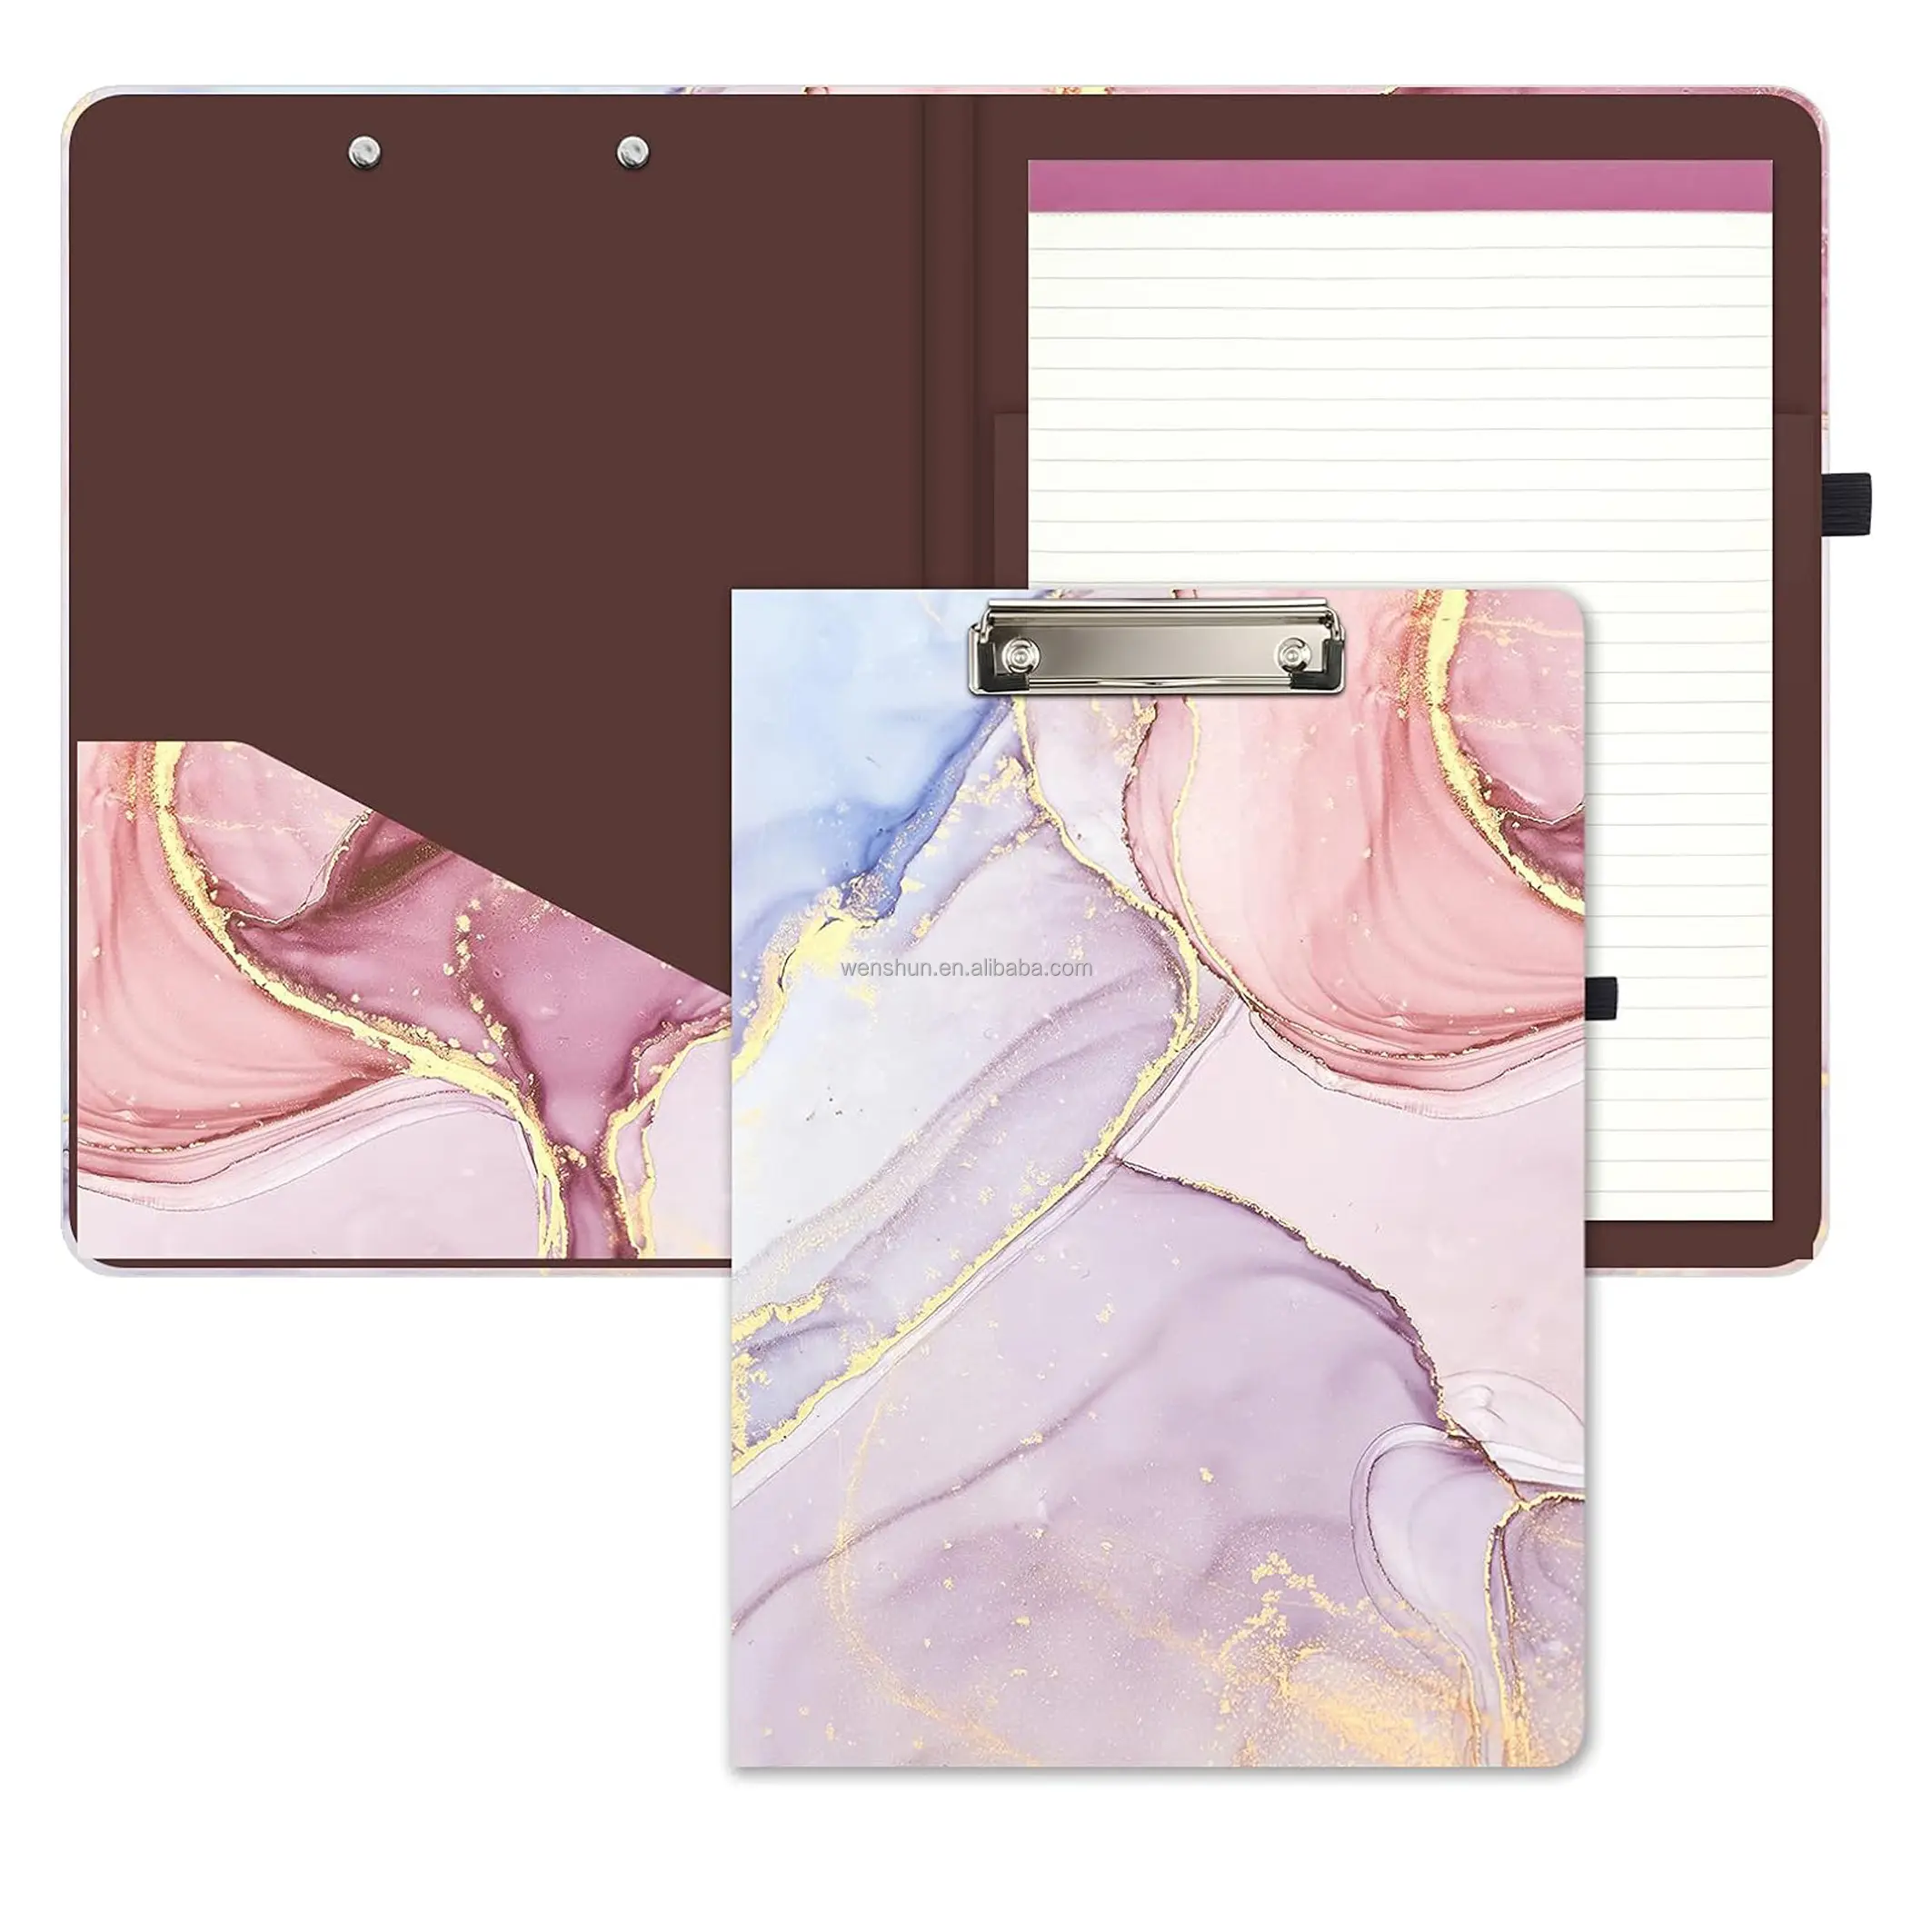 9.2x12.8'' Clipboard Folio with Refillable Lined Notepad and Interior Storage Pocket for Students